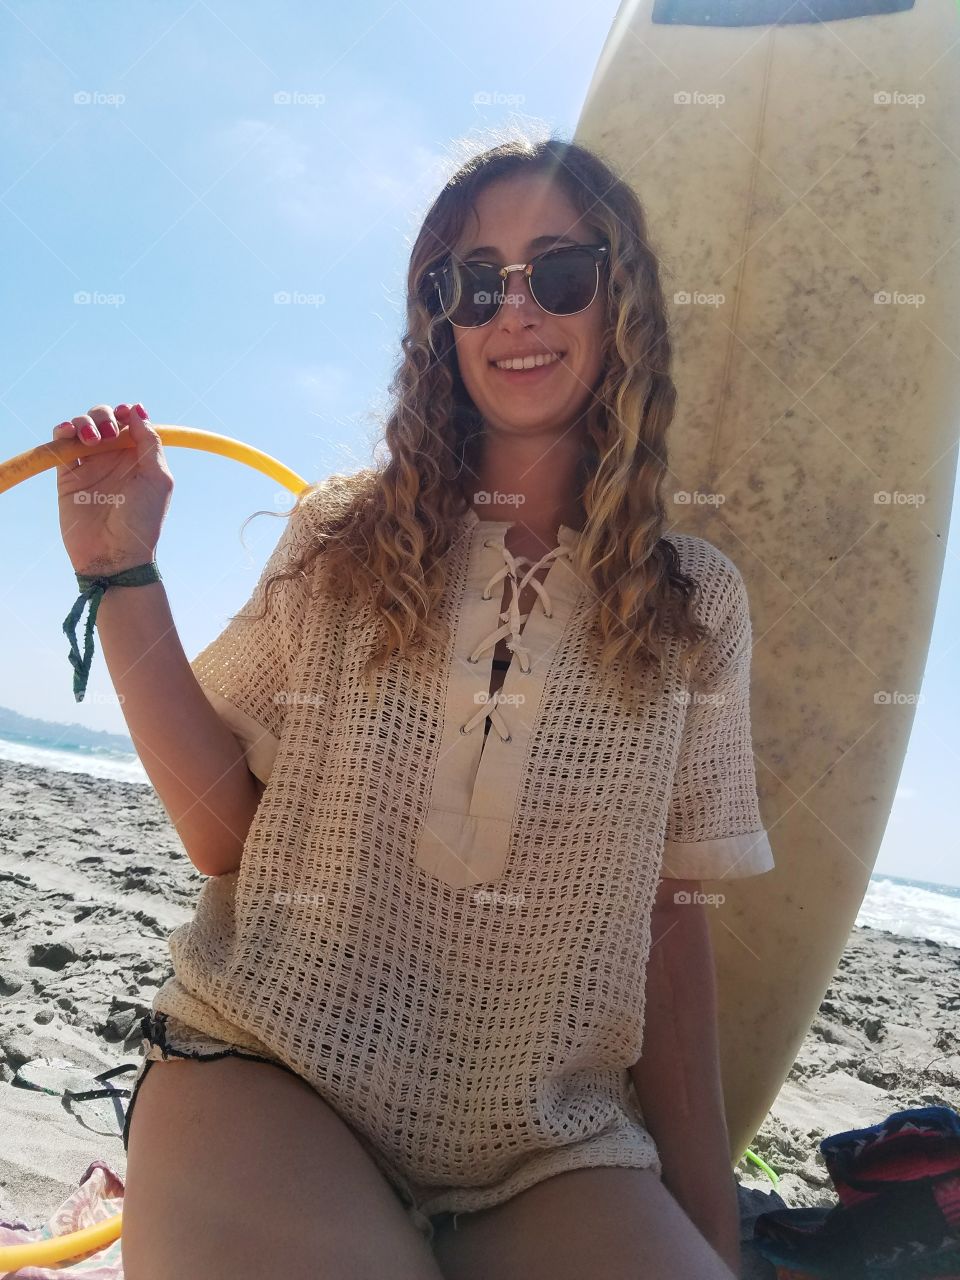 a girl with sunglasses and a hulahoop sitting in front of a surfboard on the beach